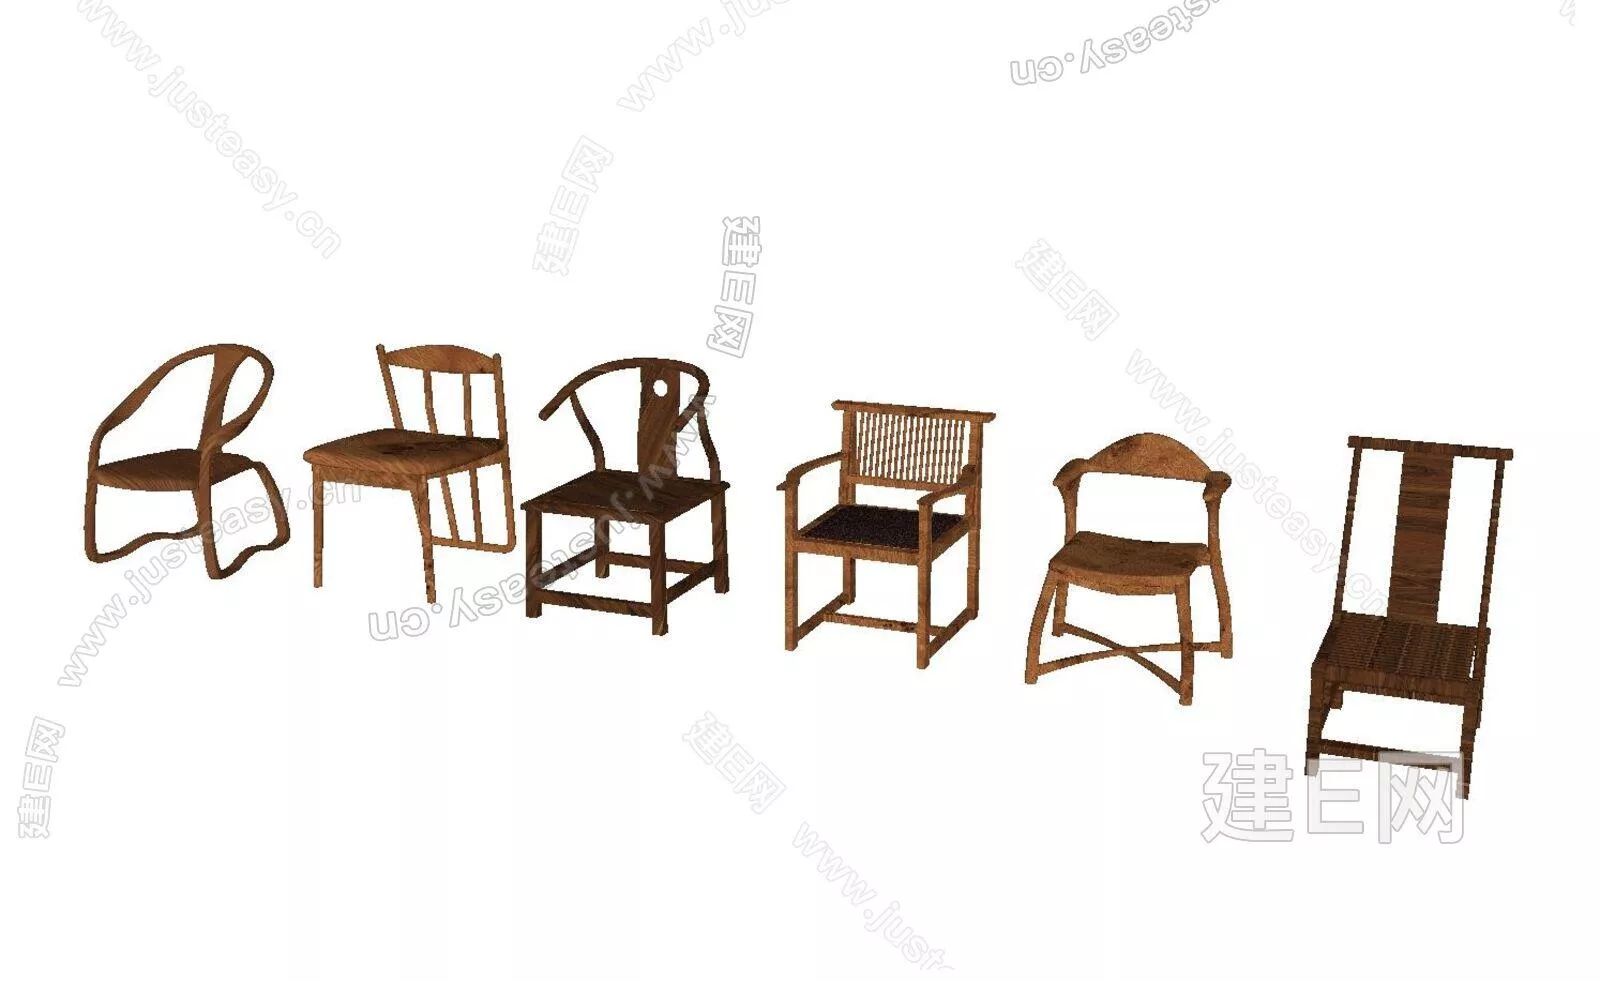 CHINESE OFFICE CHAIR - SKETCHUP 3D MODEL - ENSCAPE - 112476651